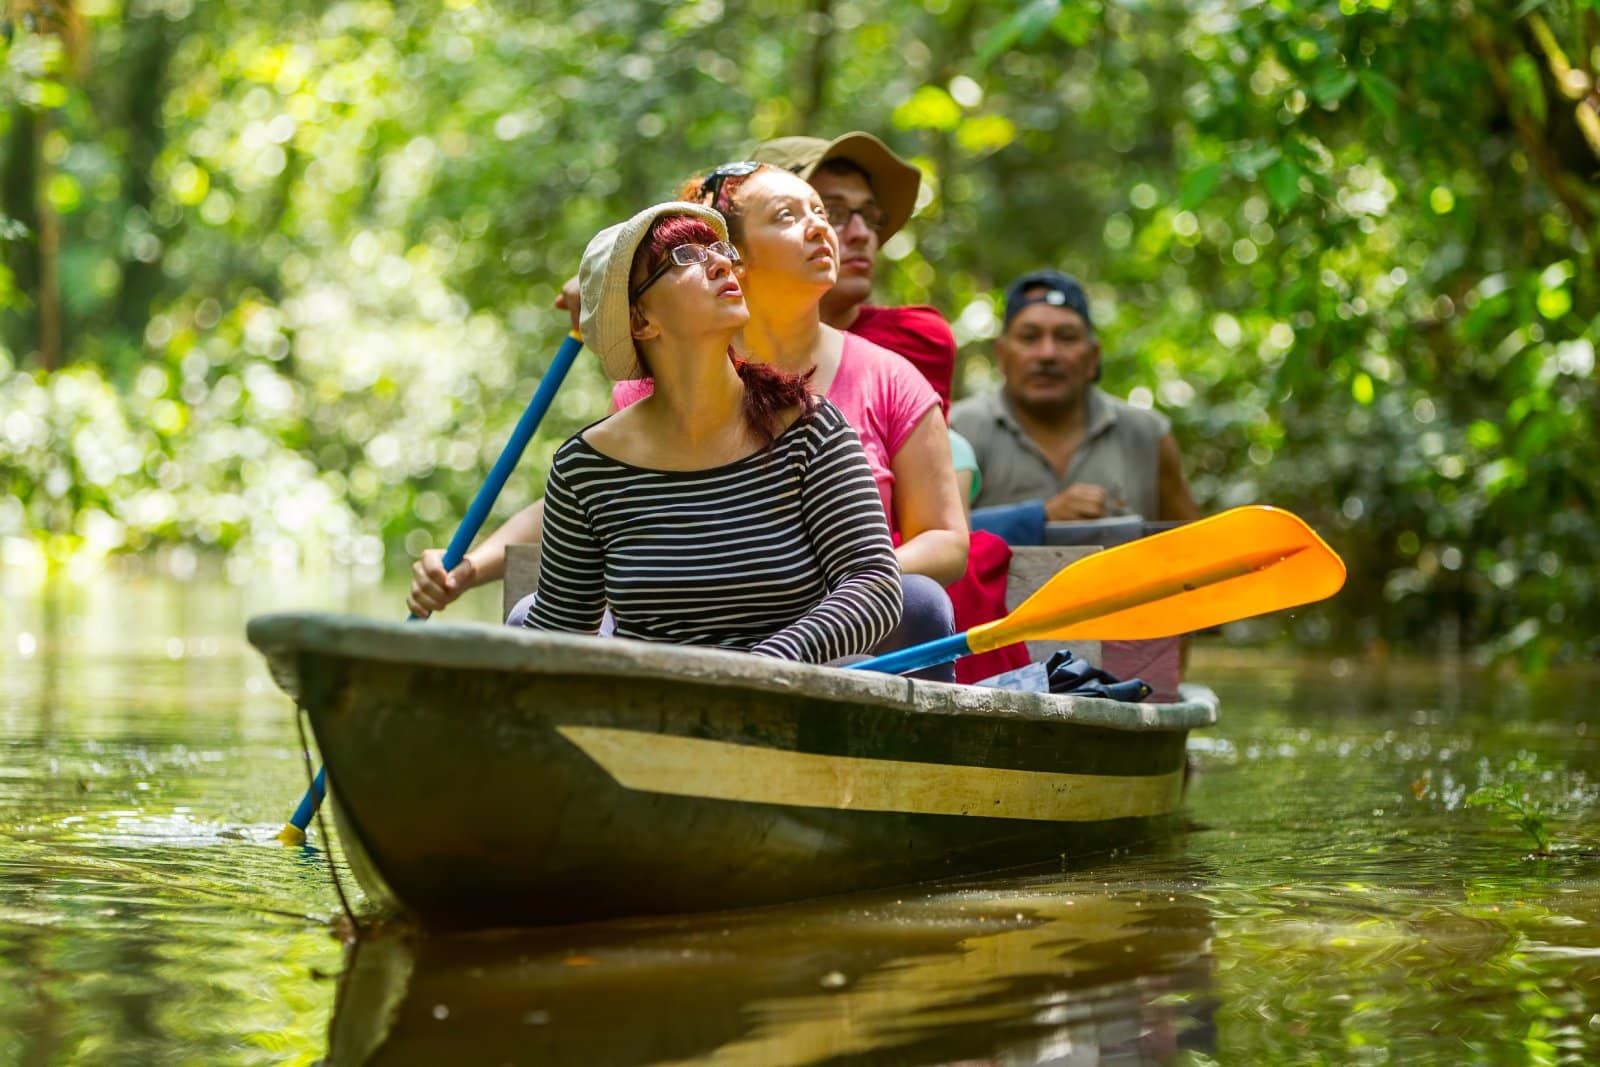 <p class="wp-caption-text">Image Credit: Shutterstock / Ammit Jack</p>  <p><span>Sustainable tourism in the Amazon involves choosing services and experiences that are environmentally responsible, support local economies, and preserve cultural heritage. This includes selecting lodges, guides, and tours owned and operated by local communities or ensuring fair compensation and working conditions for indigenous guides and healers.</span></p>